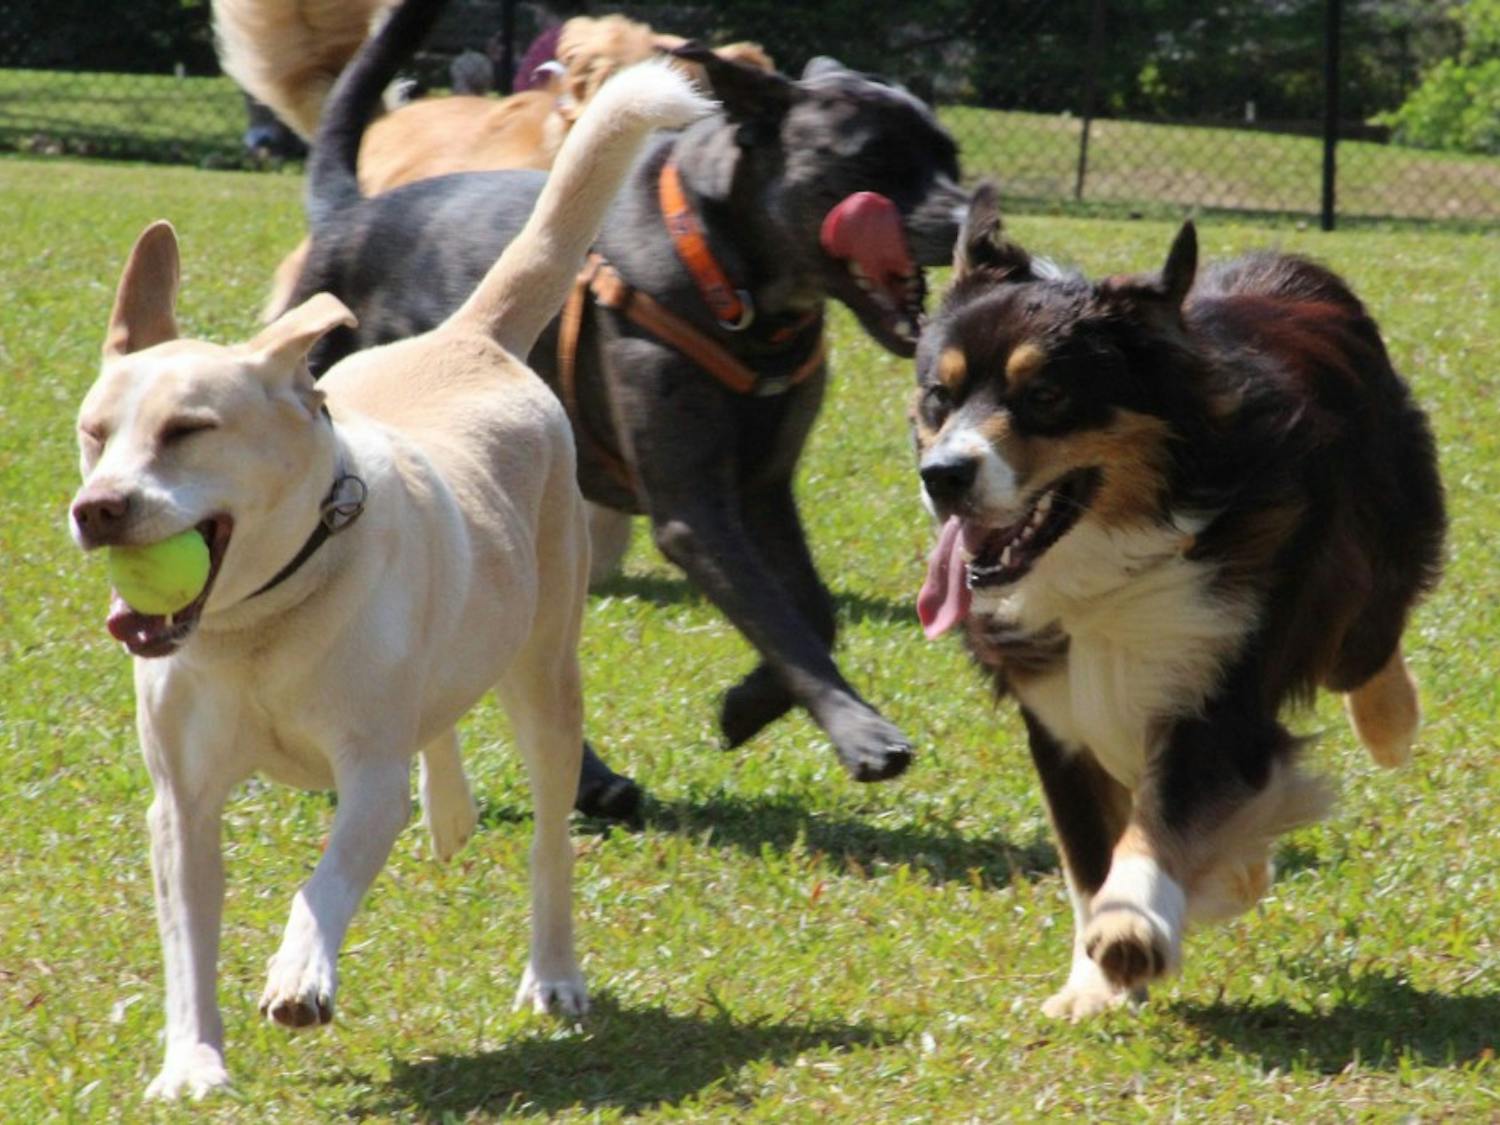 Several dogs run the length of the&nbsp;Opelika Dog Park large dog&nbsp;enclosure on Saturday,&nbsp;April 14, 2018, in Opelika, Ala.